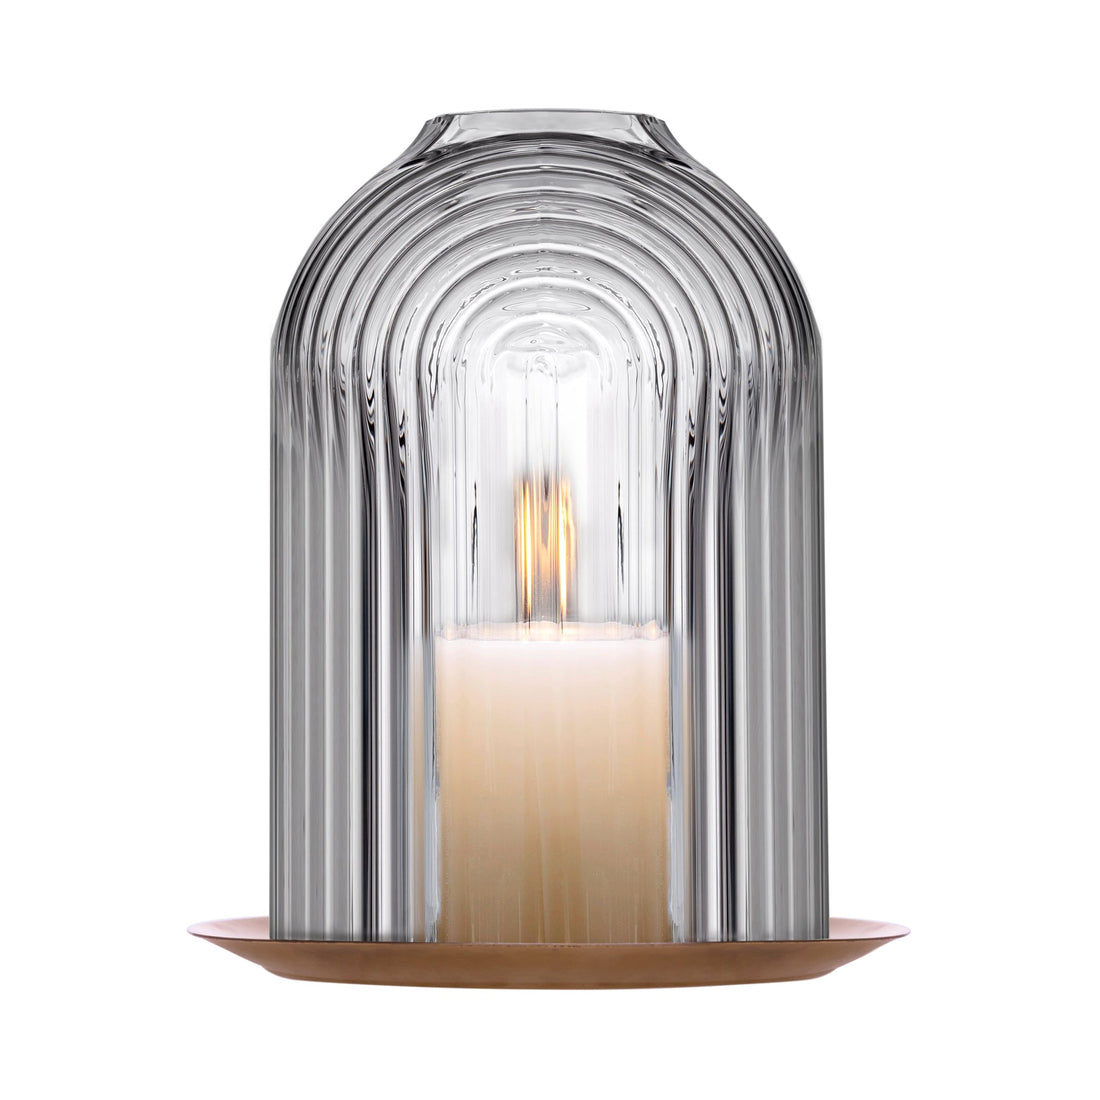 Lead-free crystal candle holder Ilo, a dome shaped candle holder with rippled glass effect, with candle presented on white background